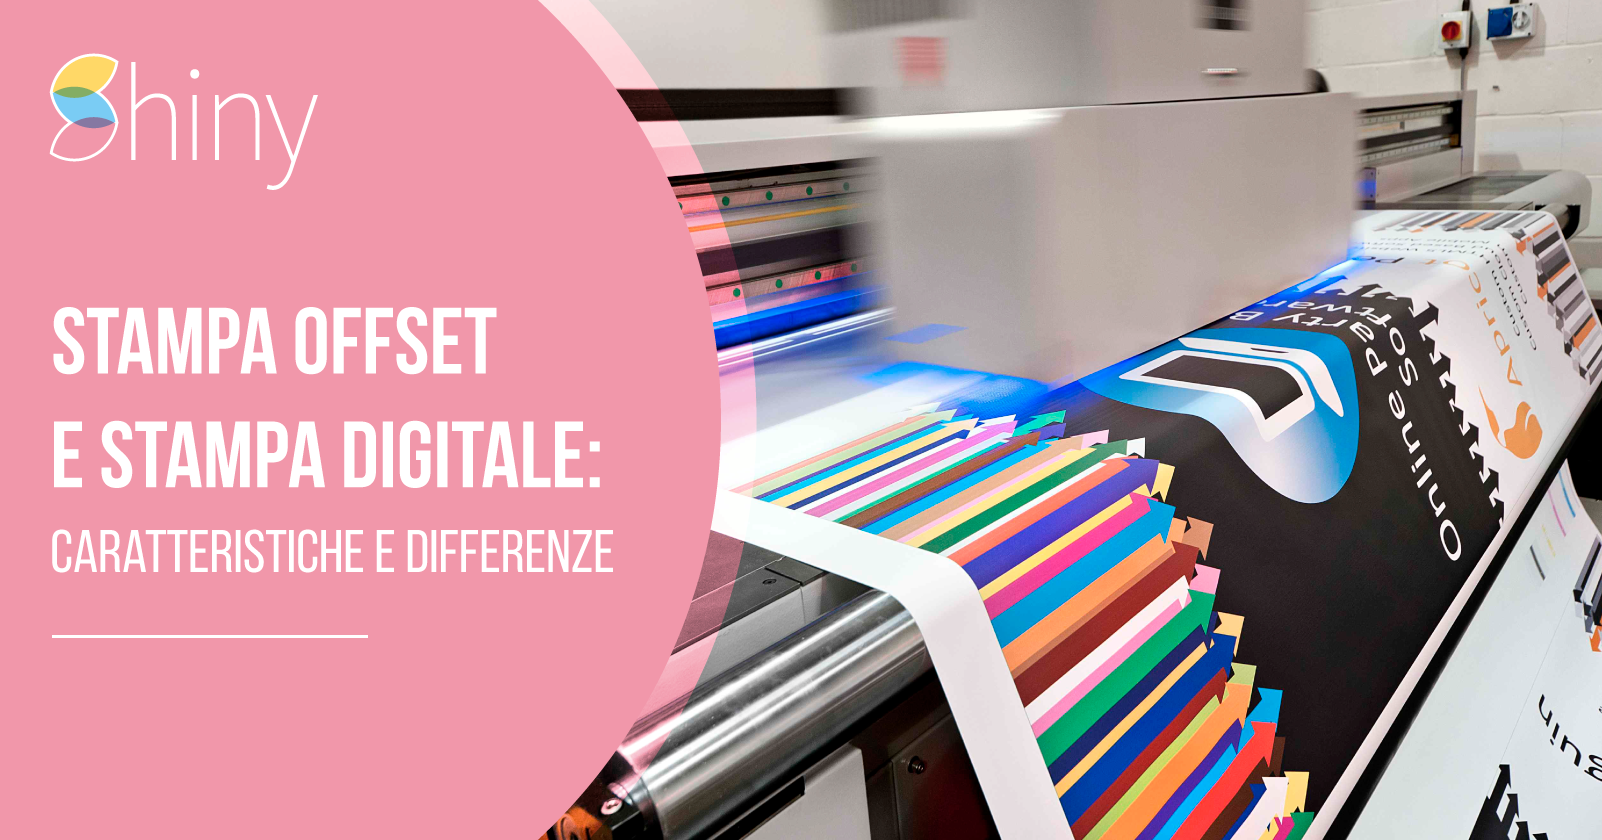 You are currently viewing Stampa offset e stampa digitale: differenze e caratteristiche